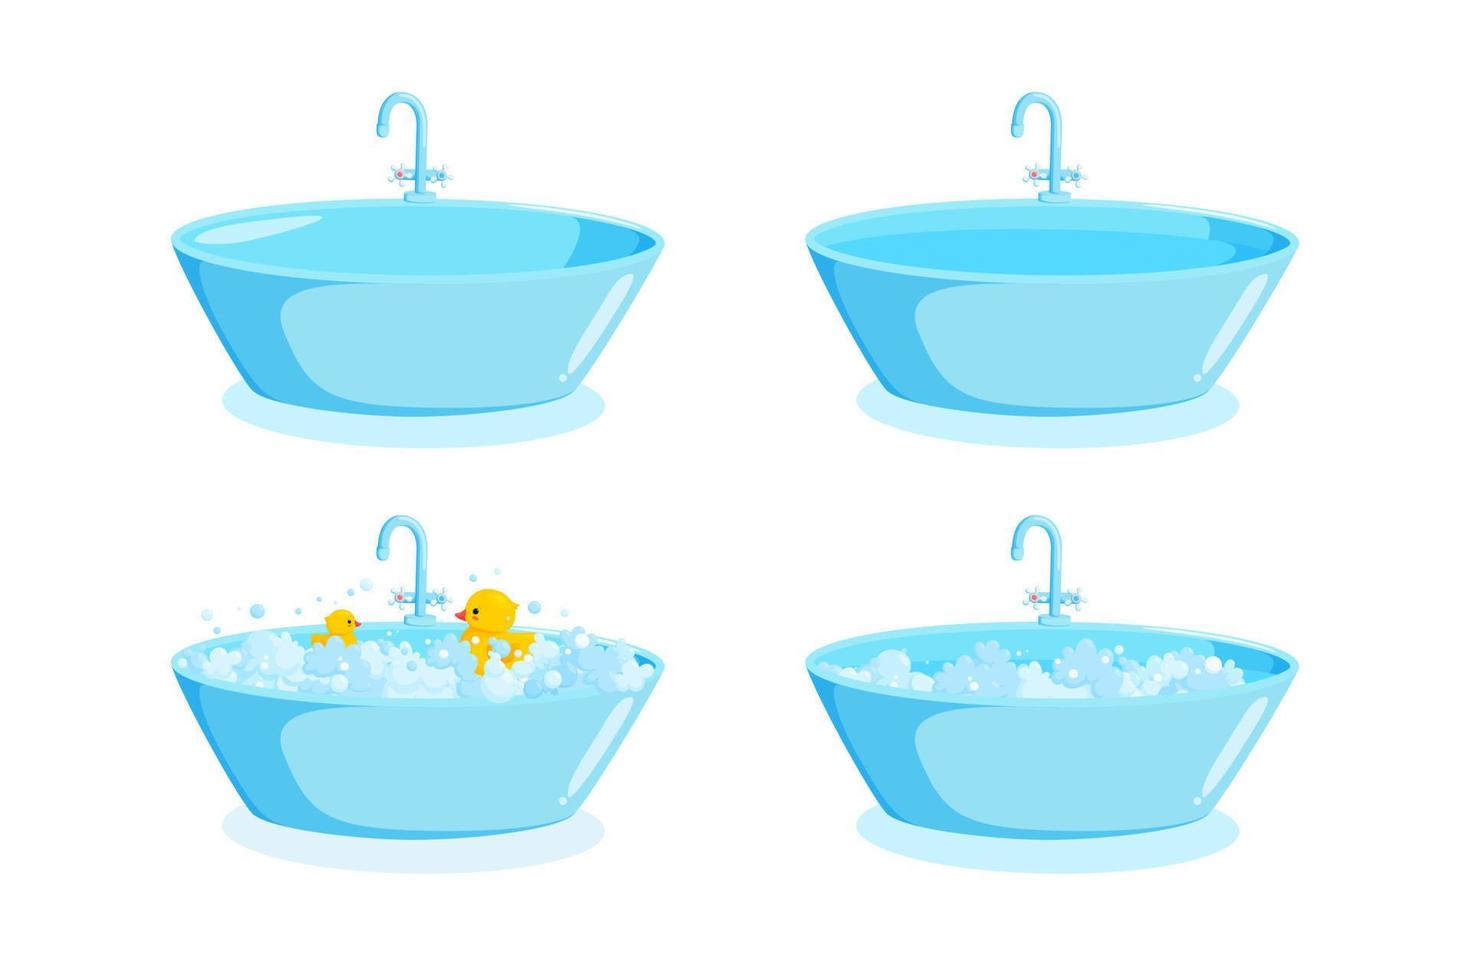 Bathtub with faucet, ducks and suds. Ellipse tub set with tap with soap foam. Vector illustration